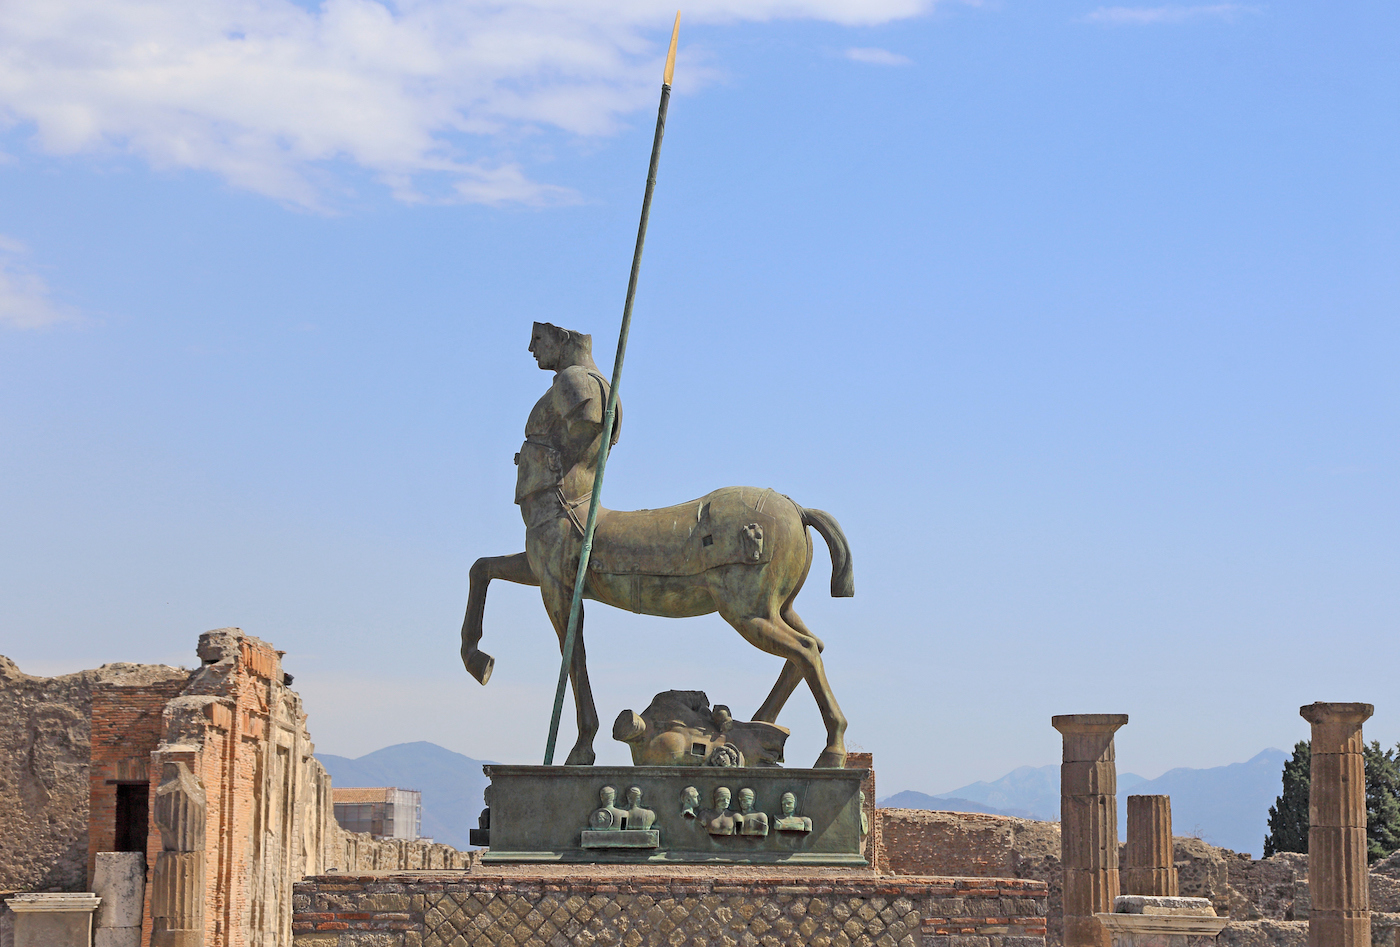 view of a bronze statue of a centaur in the ruins of the archaeological site of Pompeii Italy seen in September 2017